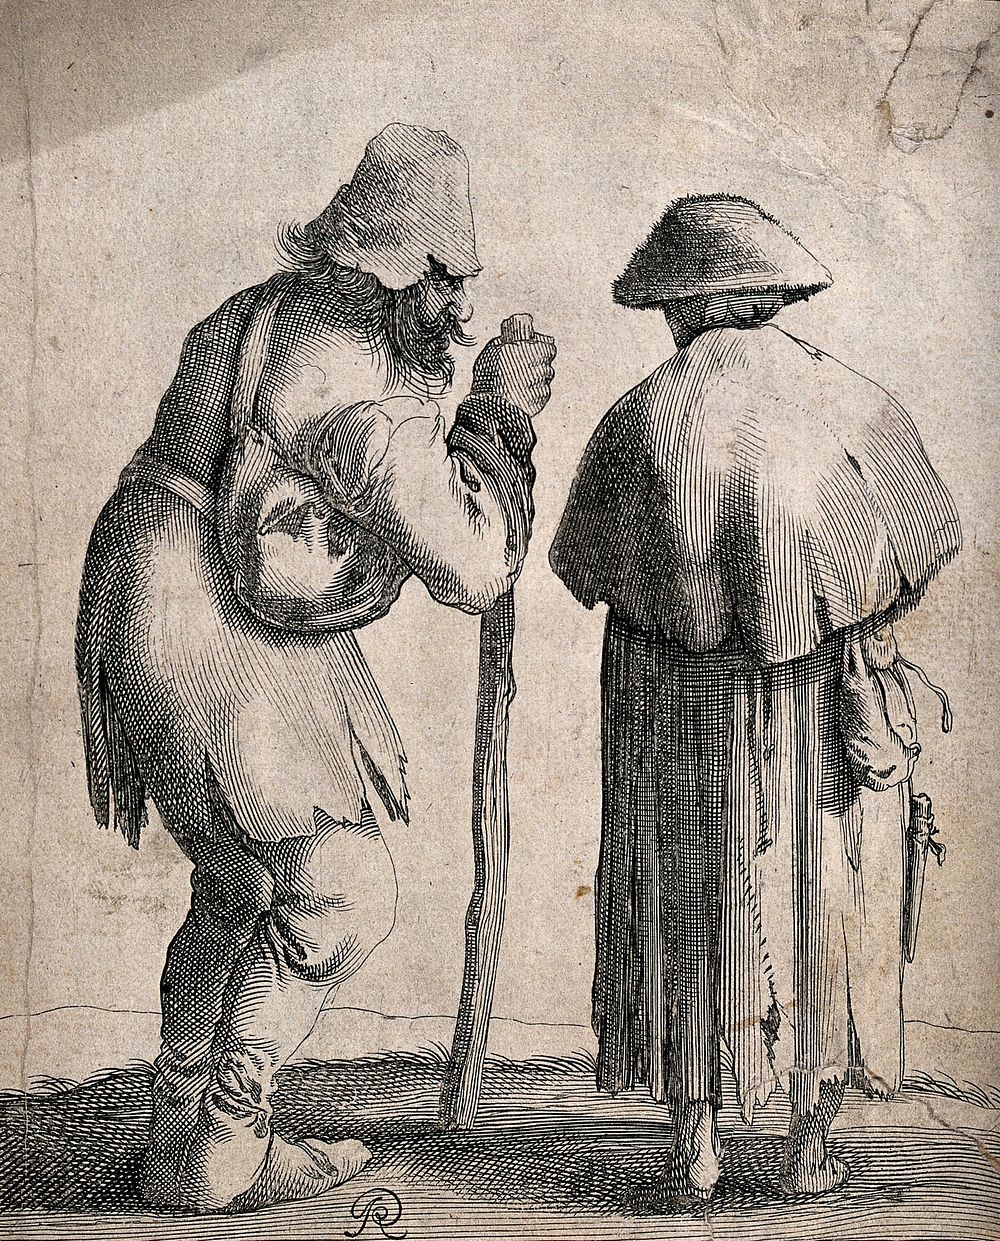 Two beggars dressed in ragged clothing, one with a large stick, are walking together on the road. Etching.